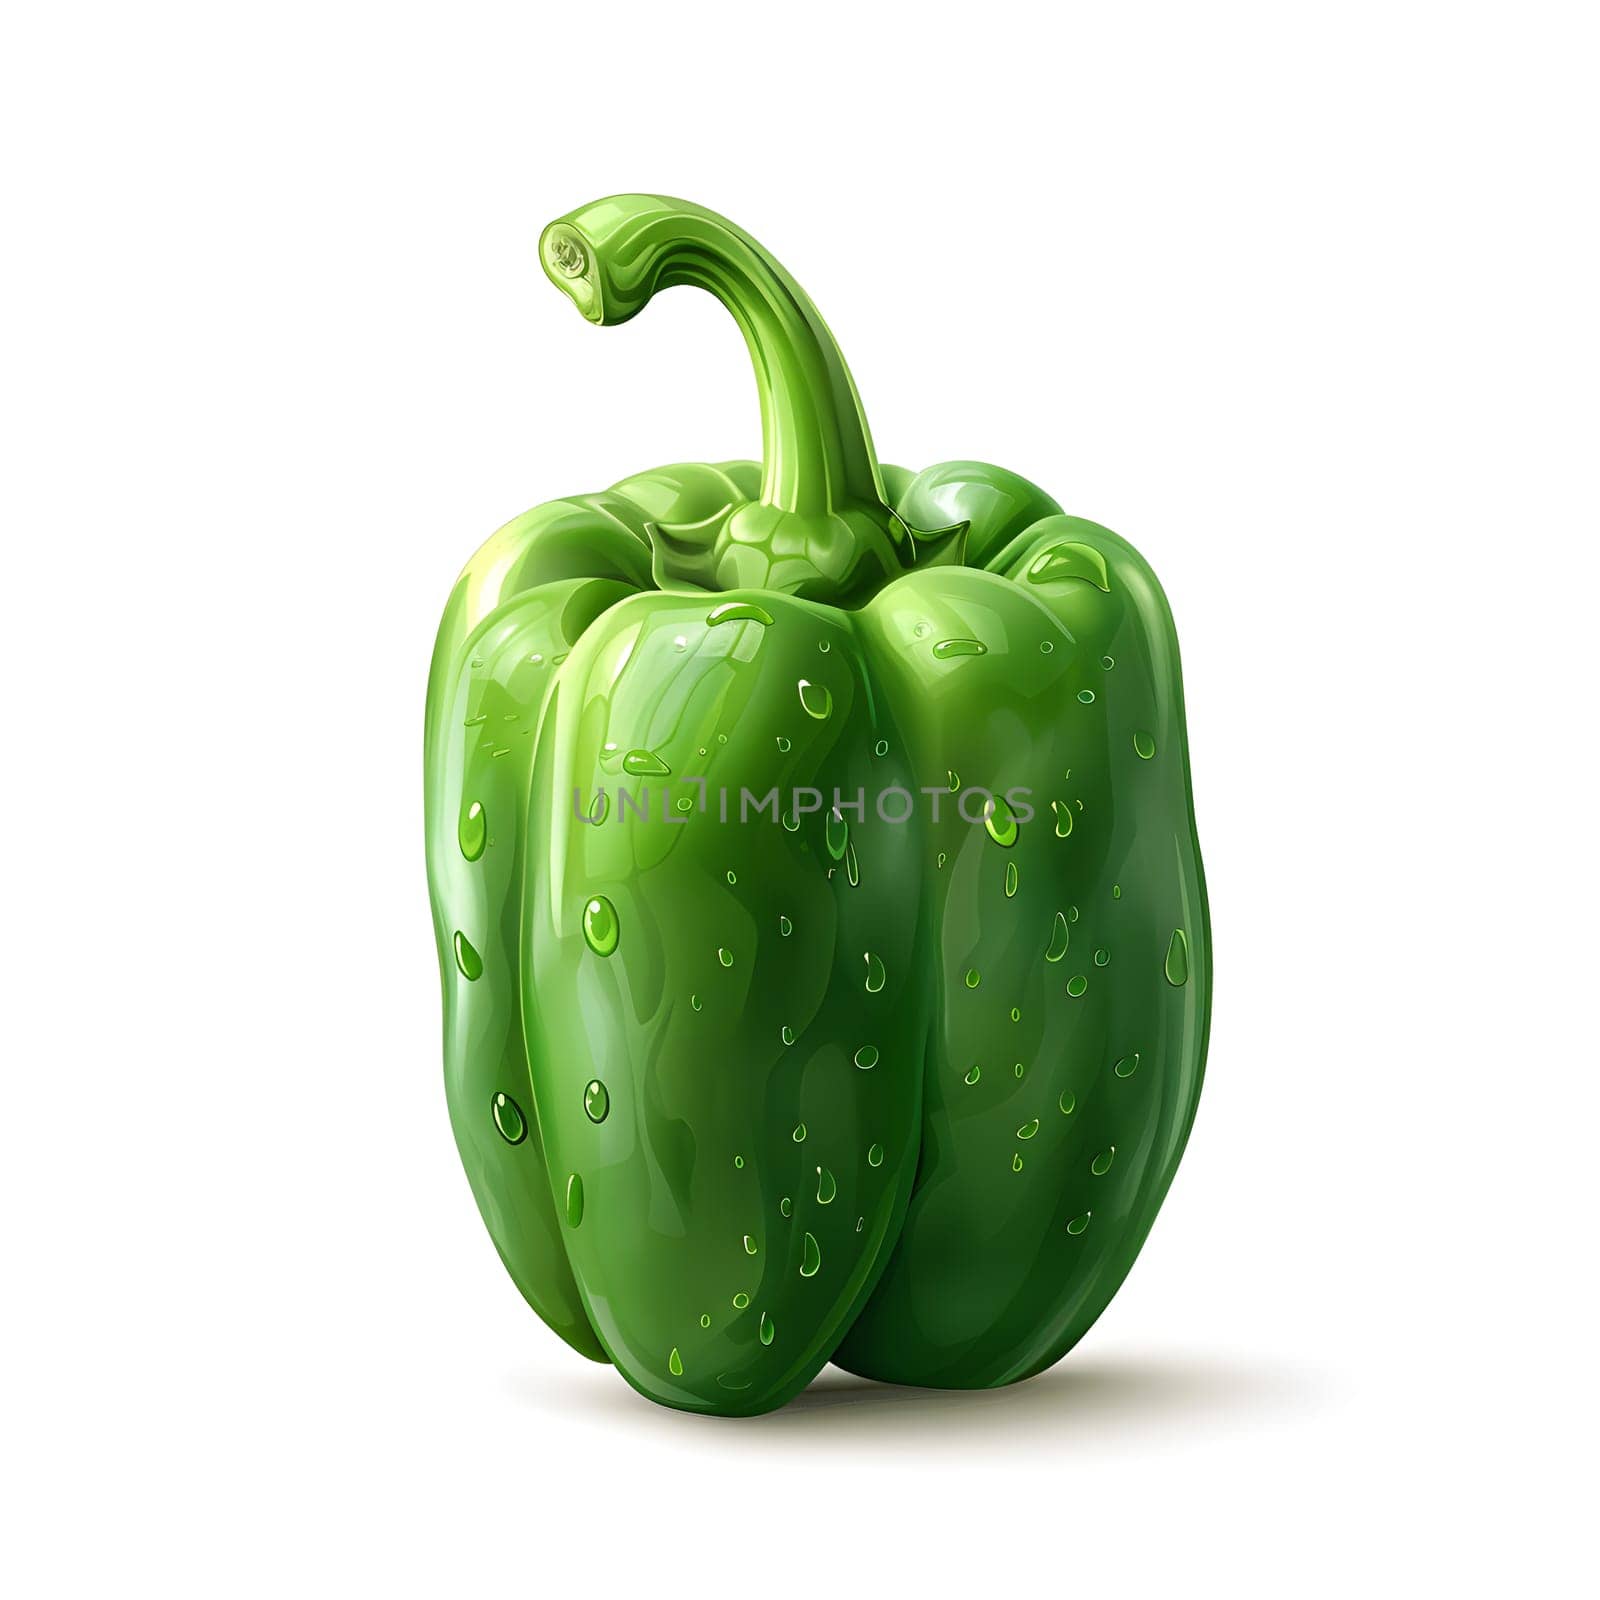 A fresh green bell pepper, a staple food ingredient, with water drops on it. An image of a natural food plant from the Capsicum family, commonly used in cooking as a vegetable